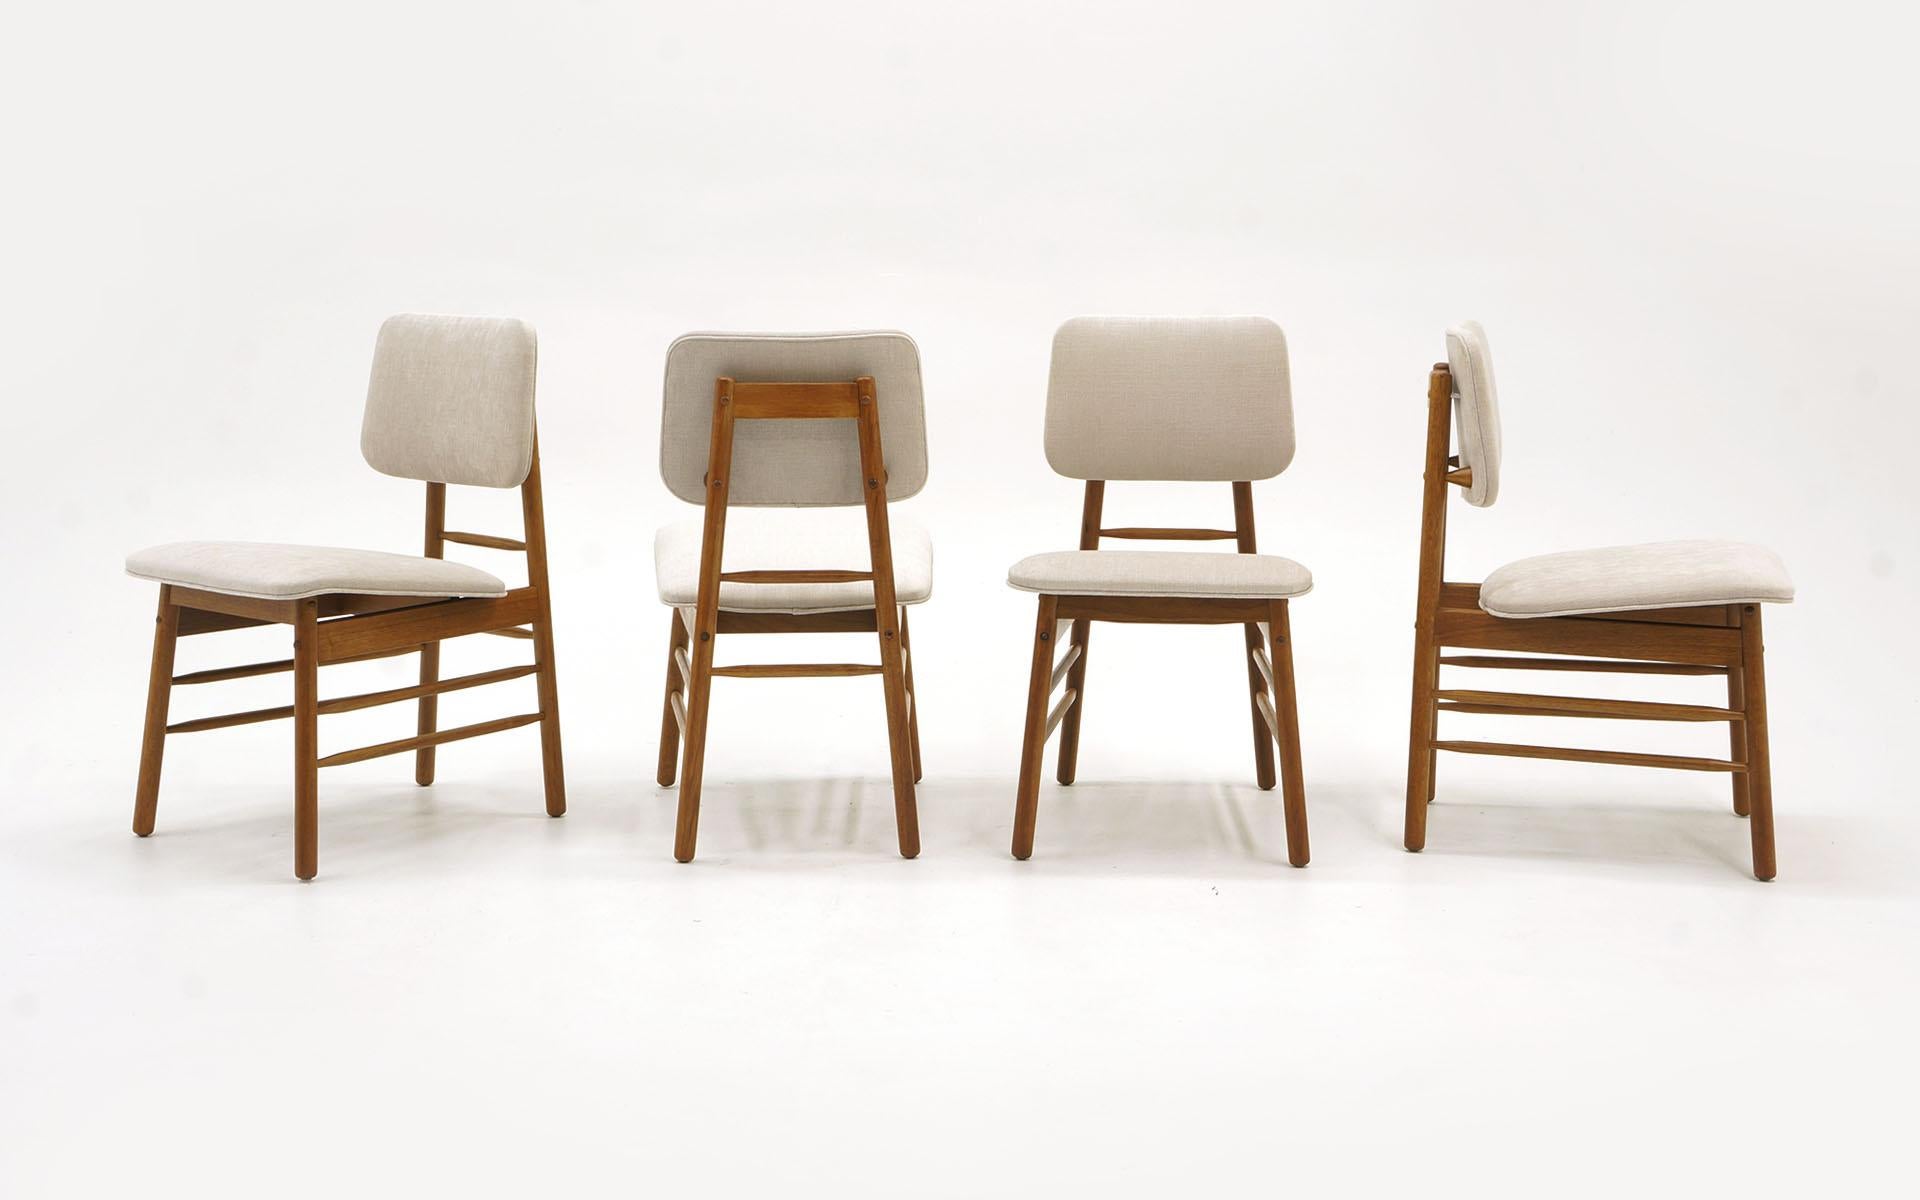 Set of four dining chairs designed by Greta Grossman. Expertly refinished and reupholstered in a soft, beautiful Knoll fabric.